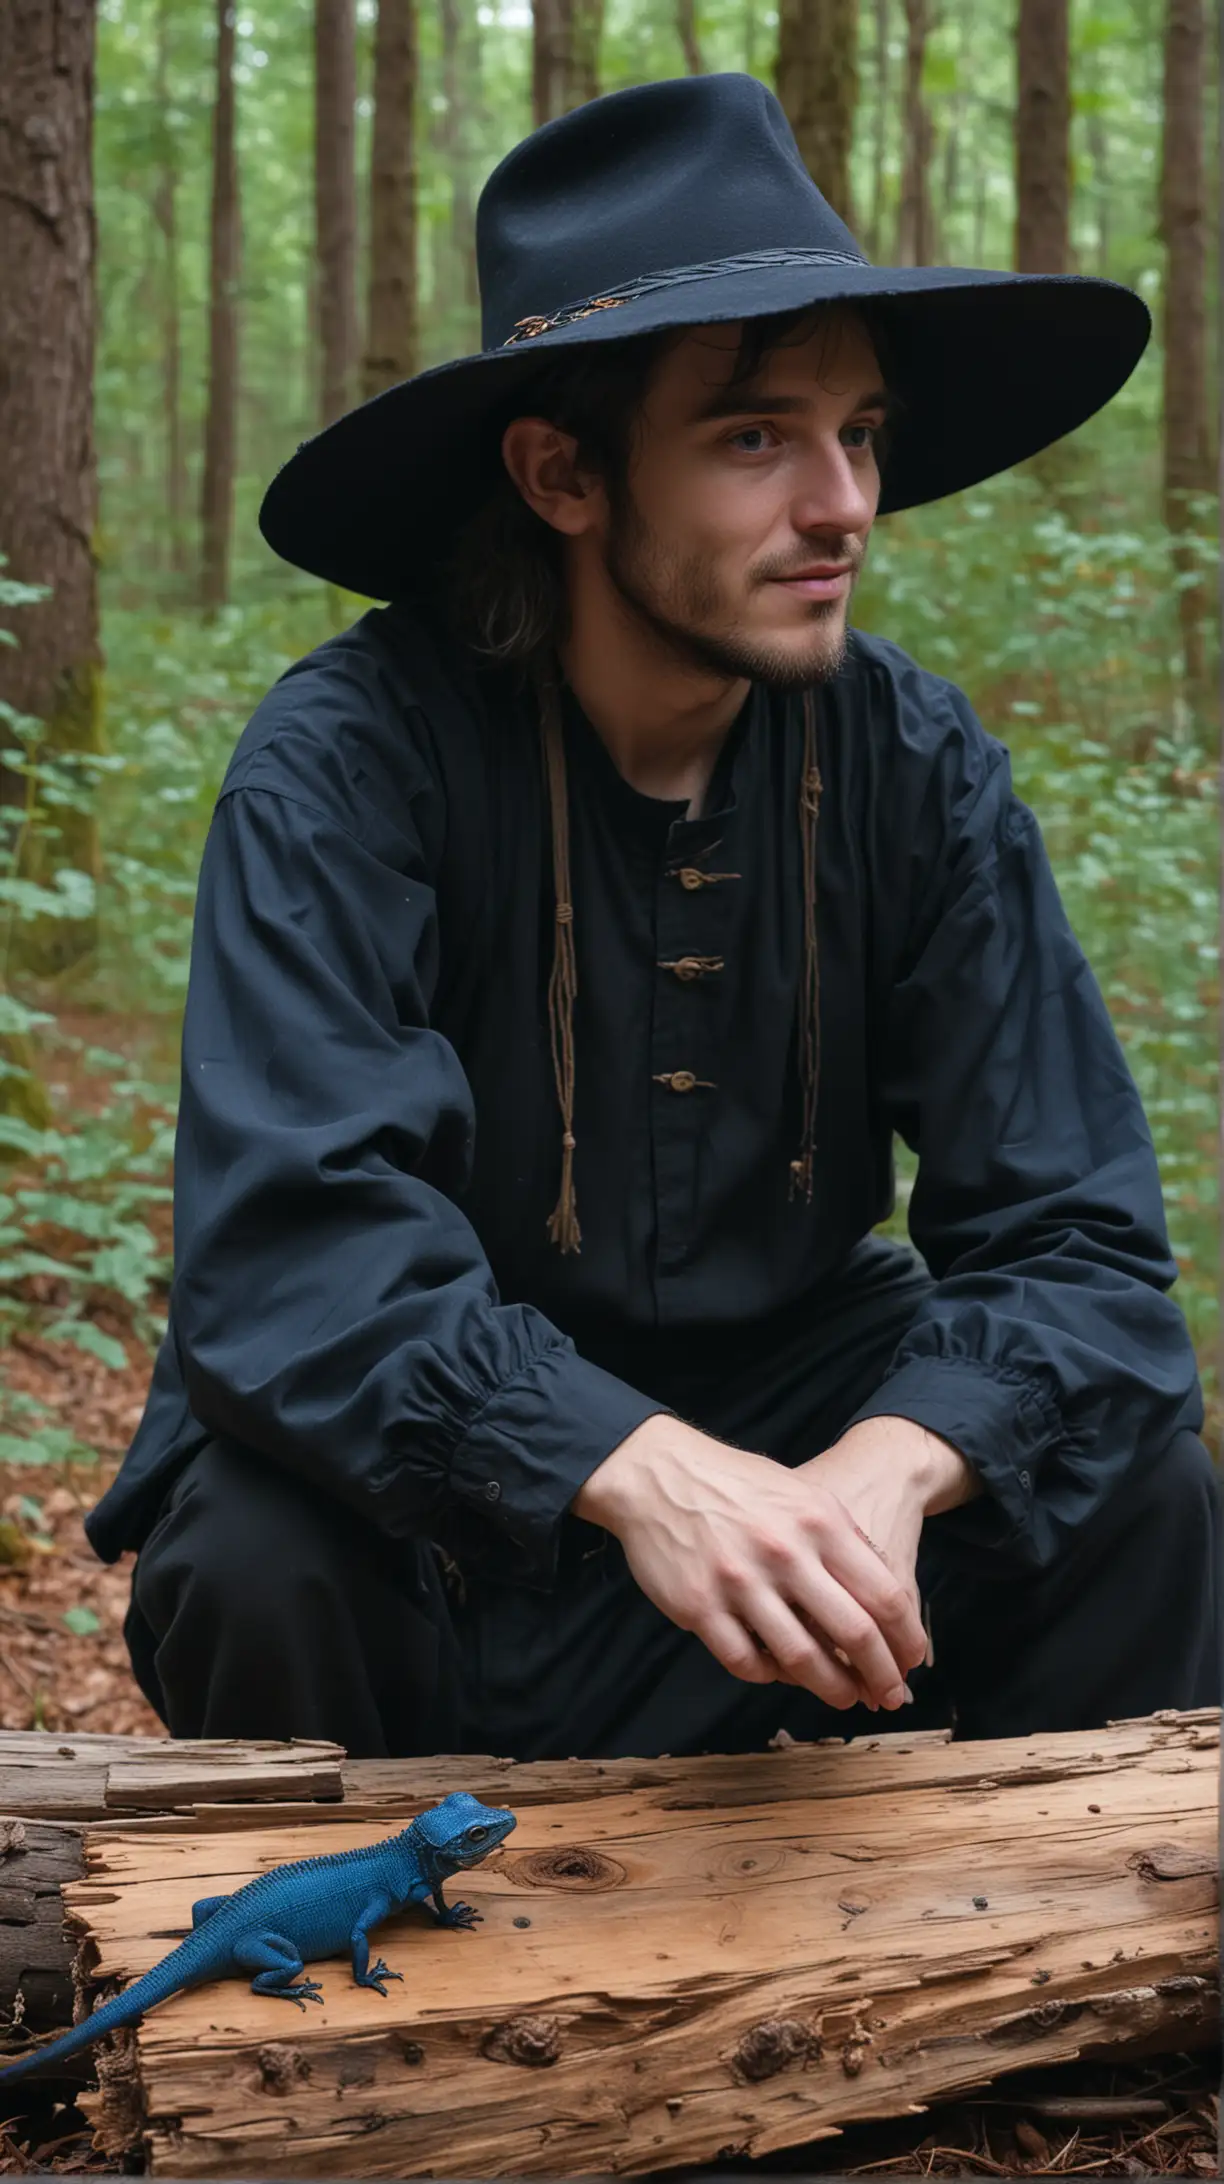  A man sits on  a log in a forest during the evening.  He wears black clothing and a black wide brimmed hat.  He has a smirk on his face and wide eye of a bright blue.  He is playing a dulcimer and there is a small dark lizard on the back of his hand.